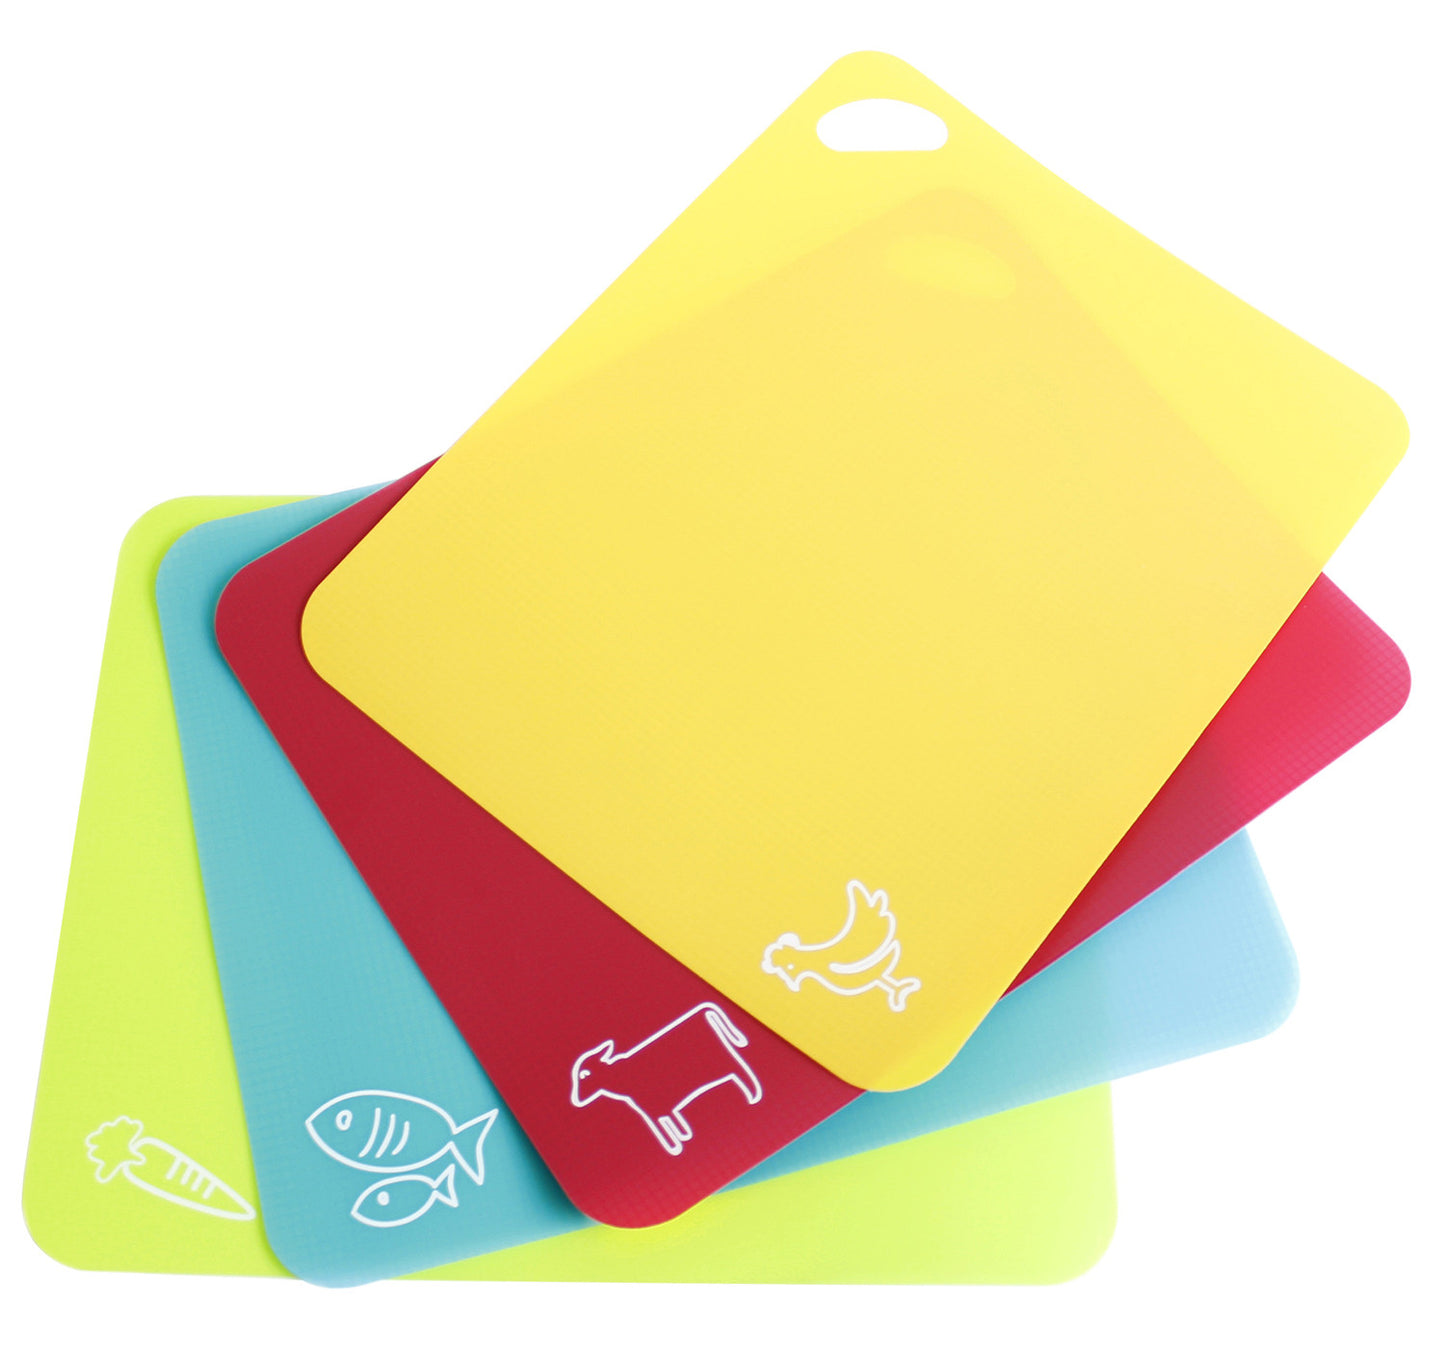 Flutto Poly Cutting Board 14.5